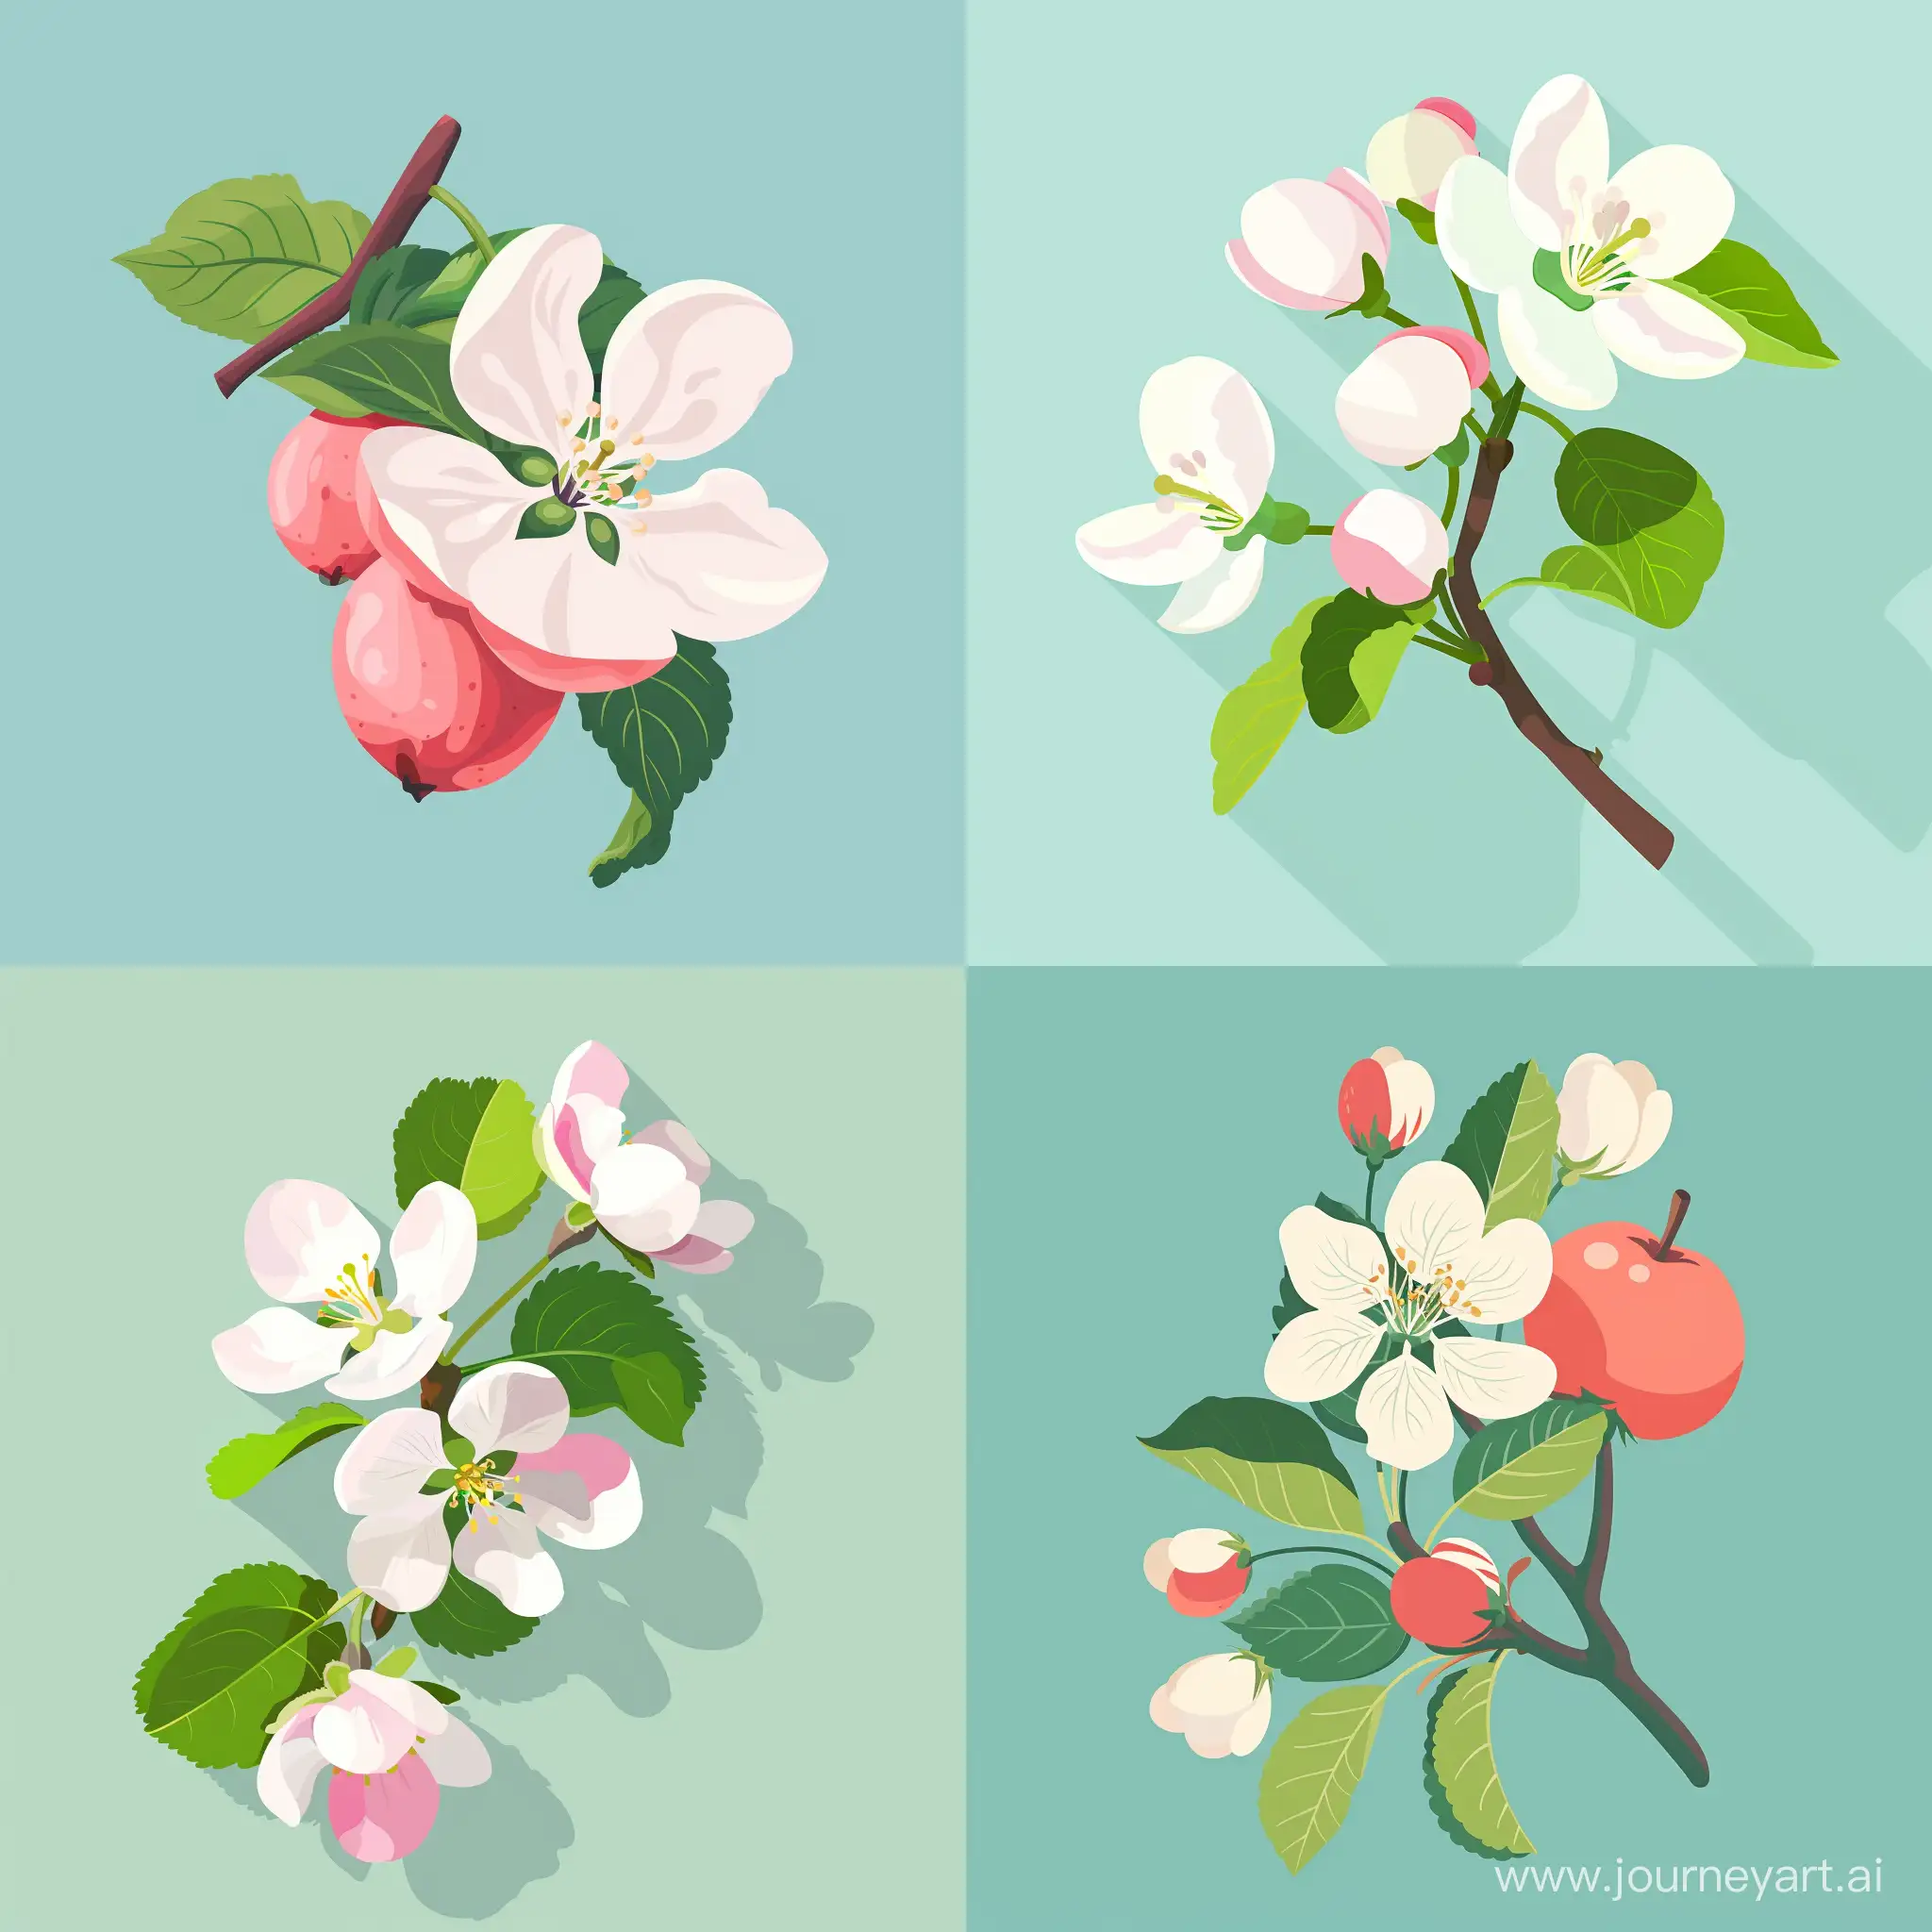 Apple blossom, high quality, HD, in flat style